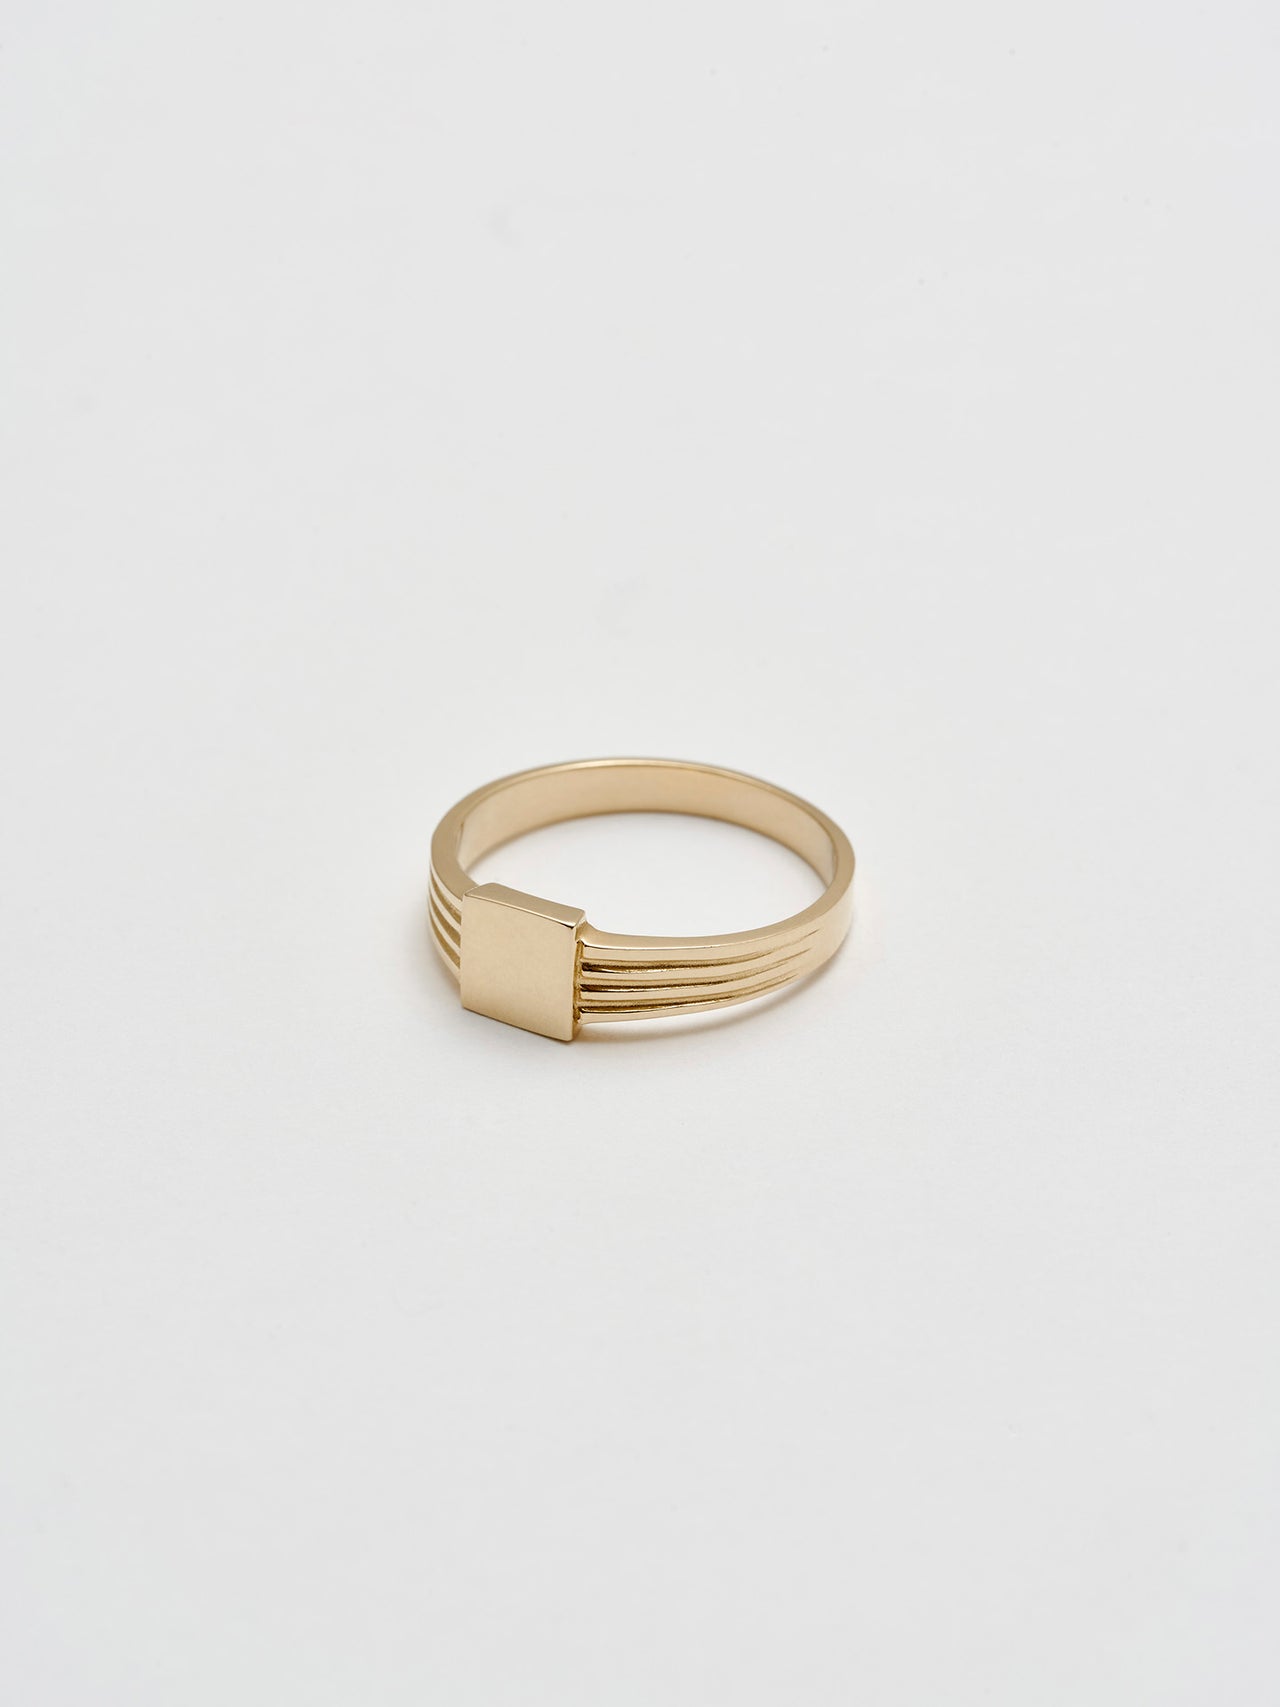 Side Shot of Mini Square ID Ring: 14kt Yellow Gold Ring with a 5mm Square ID Face and a 3.5mm to 2mm Tapered Band